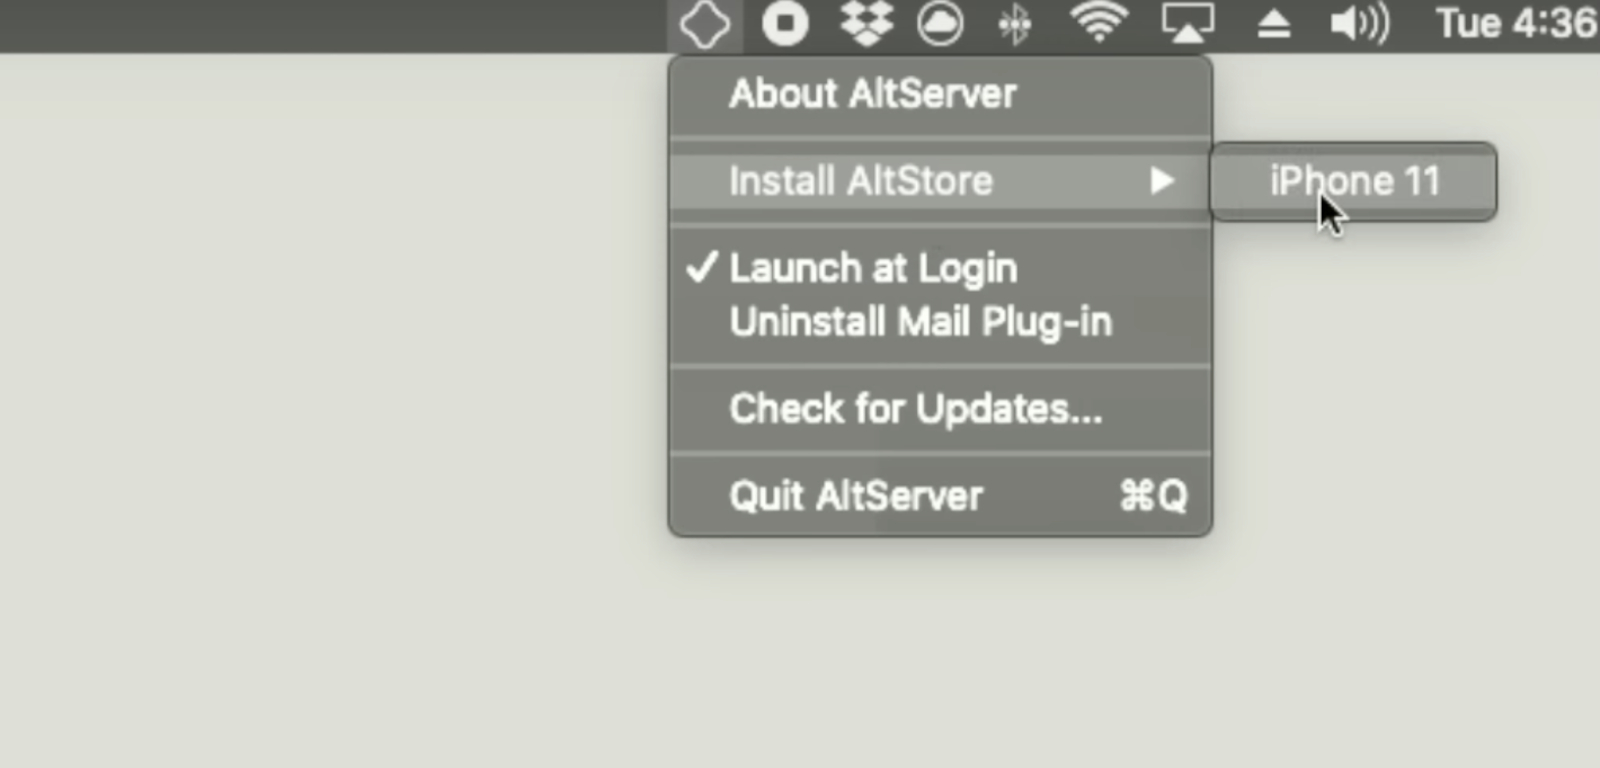 Screenshot of the top right menubar to install AltStore on iPhone